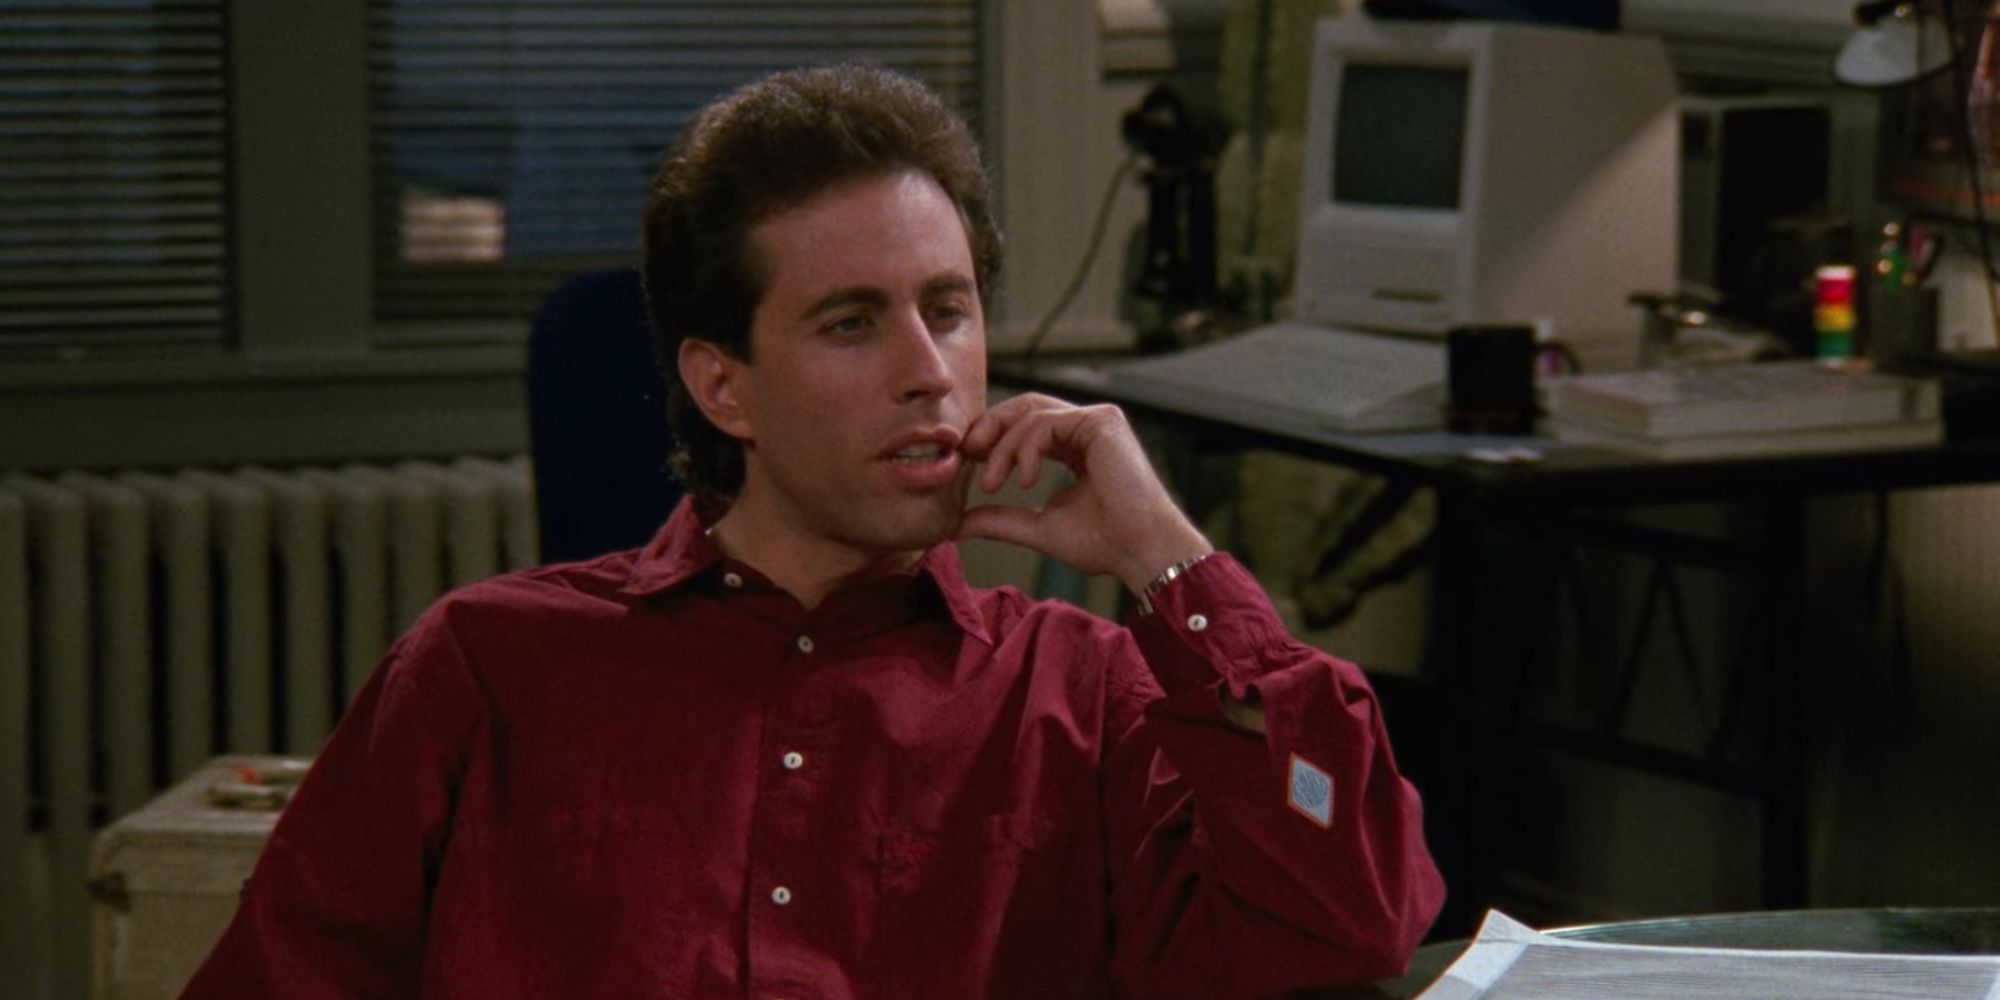 Jerry sitting on the couch in Seinfeld